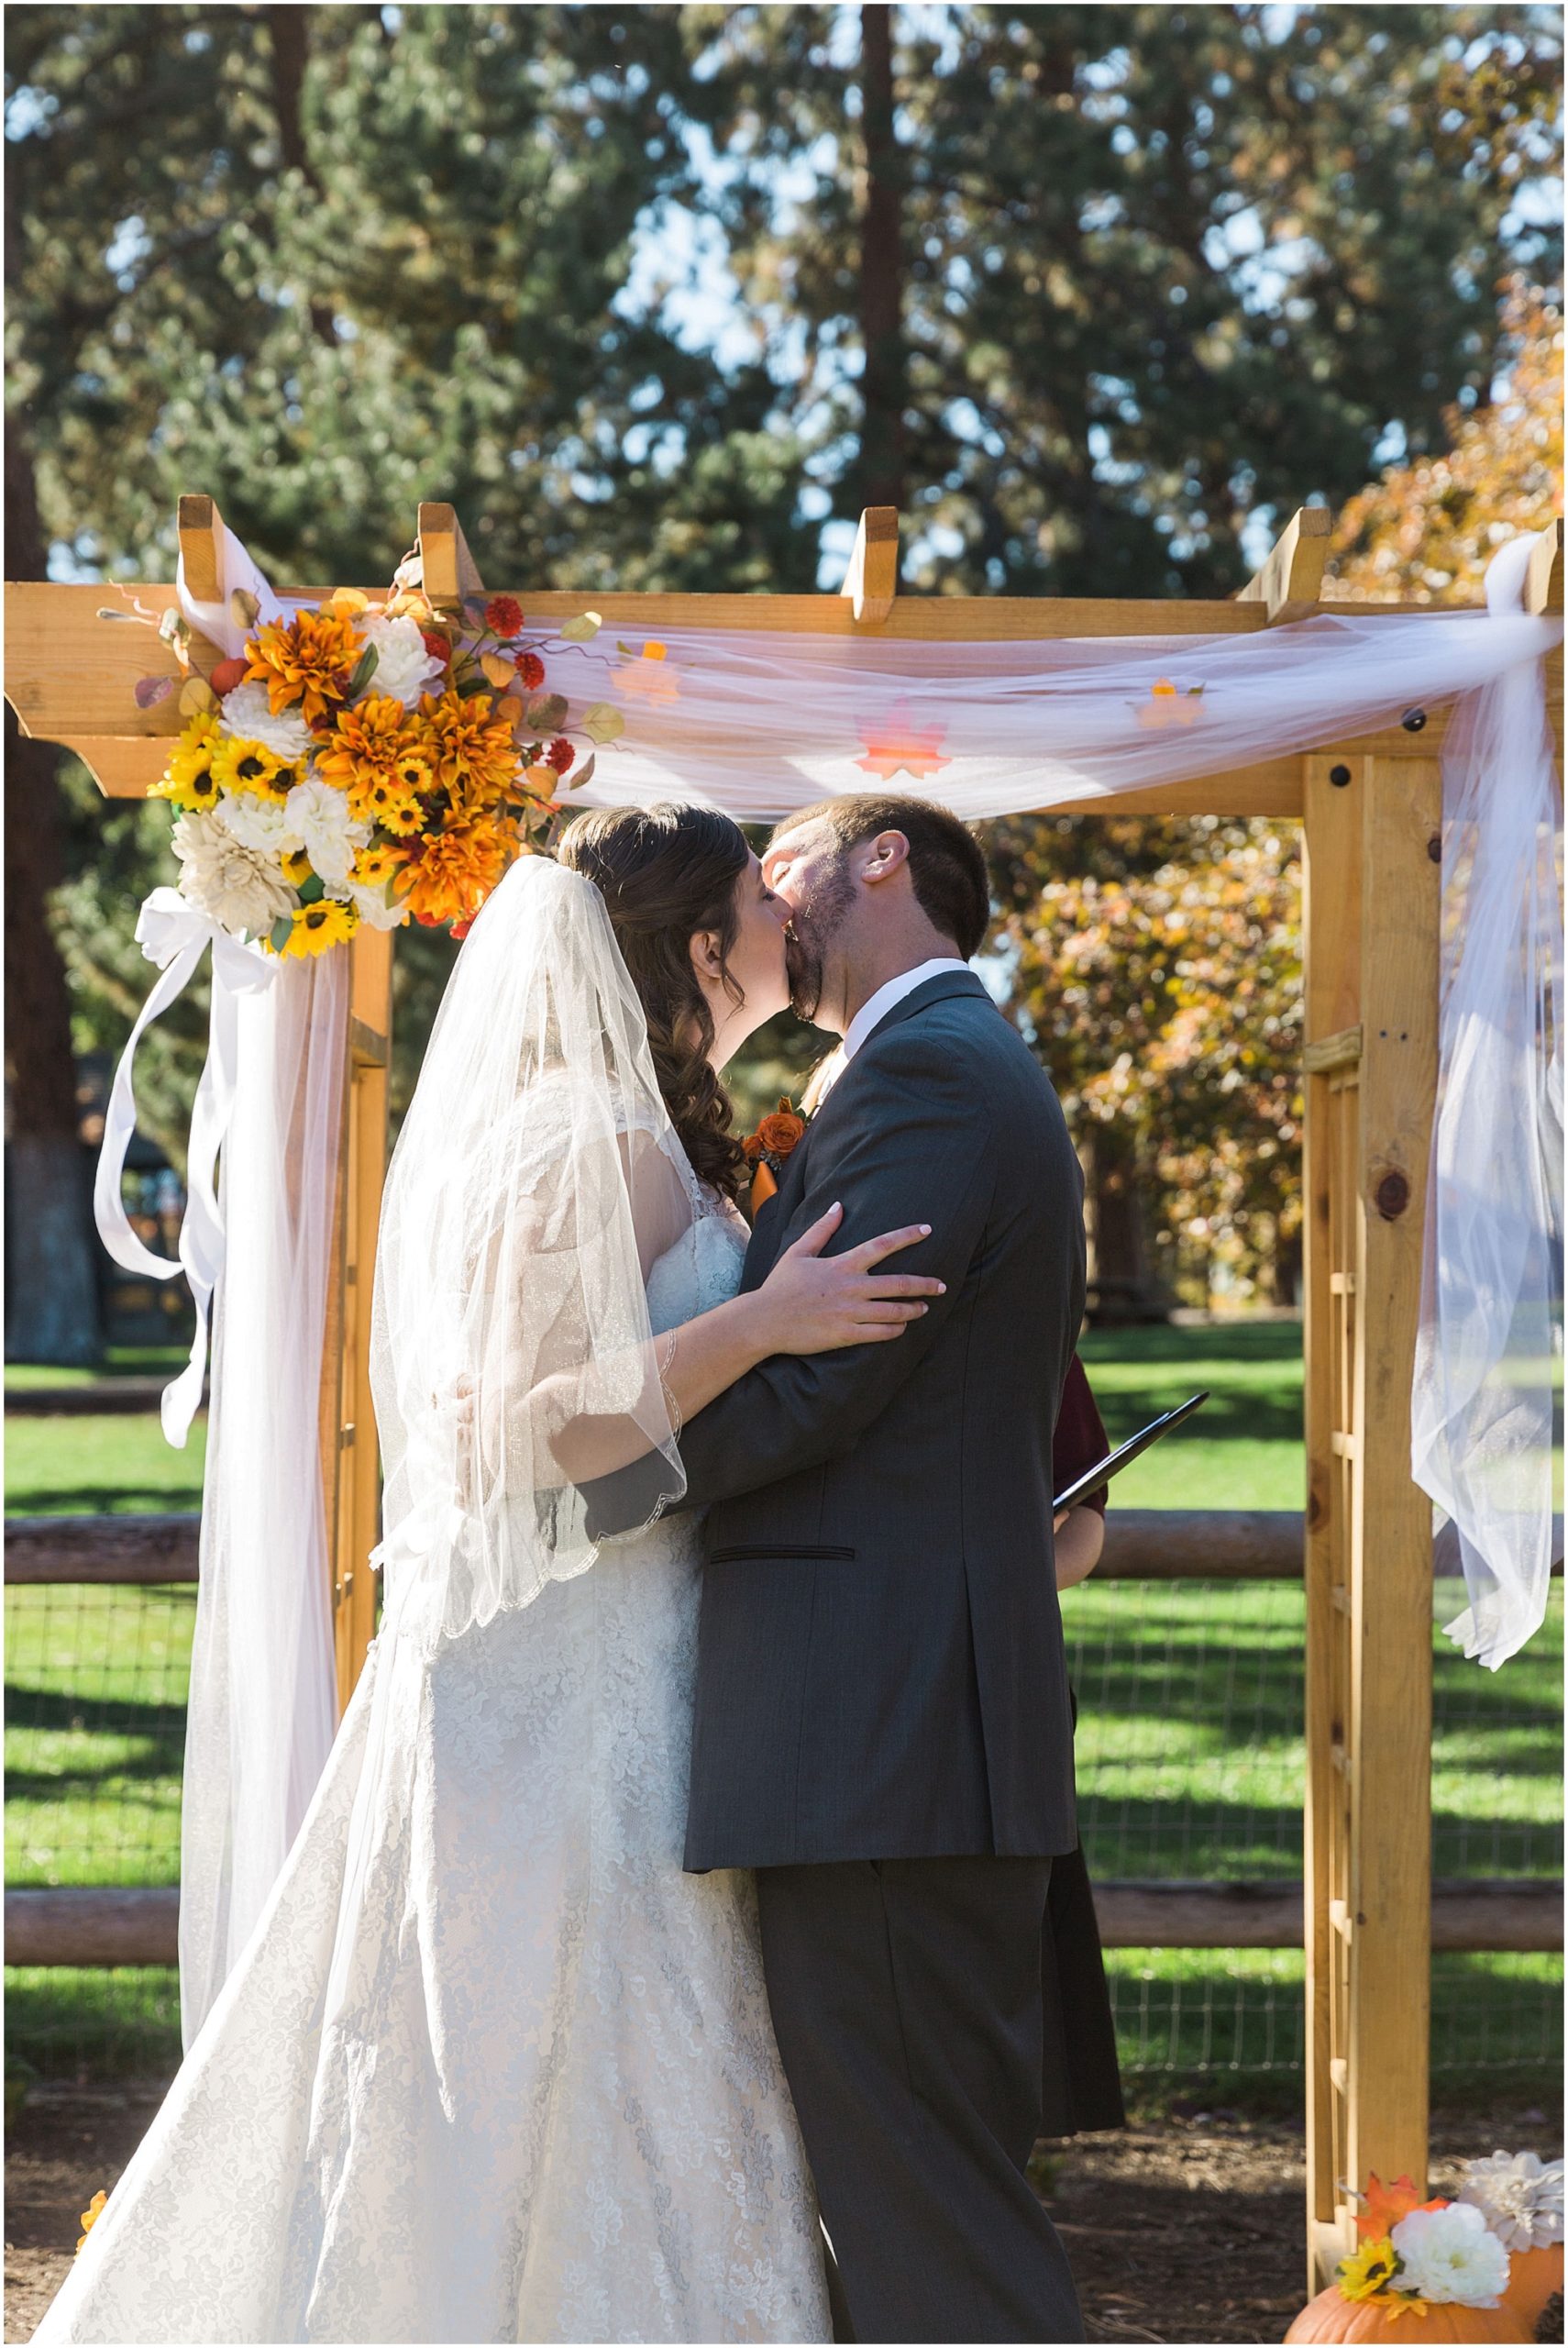 The first kiss as husband and wife for this Hollinshead Barn fall wedding in Bend, OR. | Erica Swantek Photography